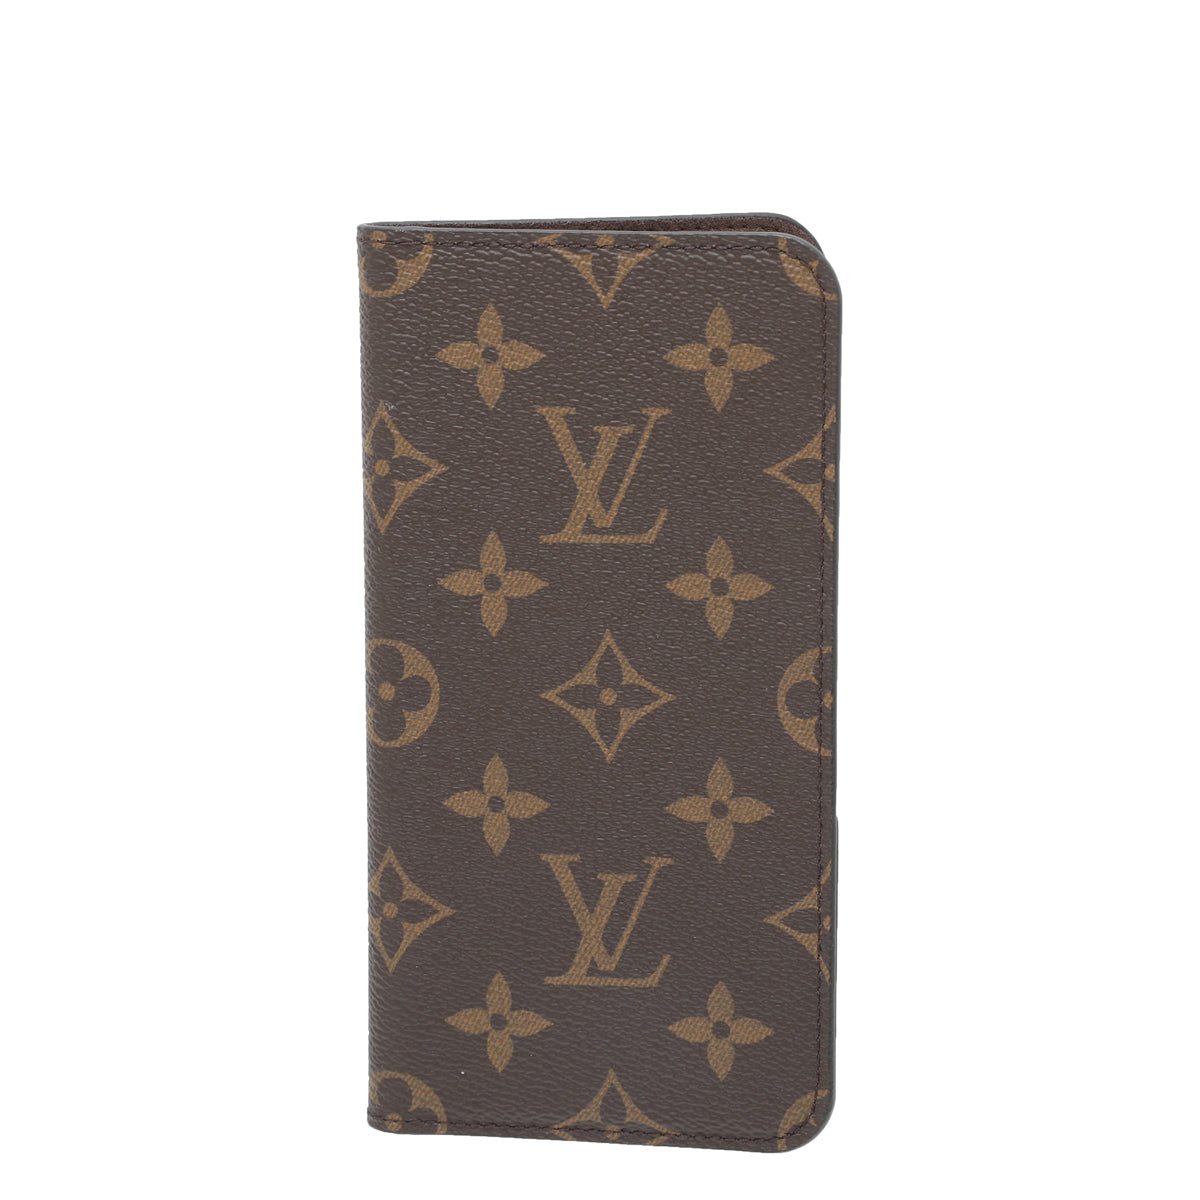 Pin by Brittany Brown on My closet  Louis vuitton bag neverfull, Louis  vuitton monogram, Vuitton neverfull